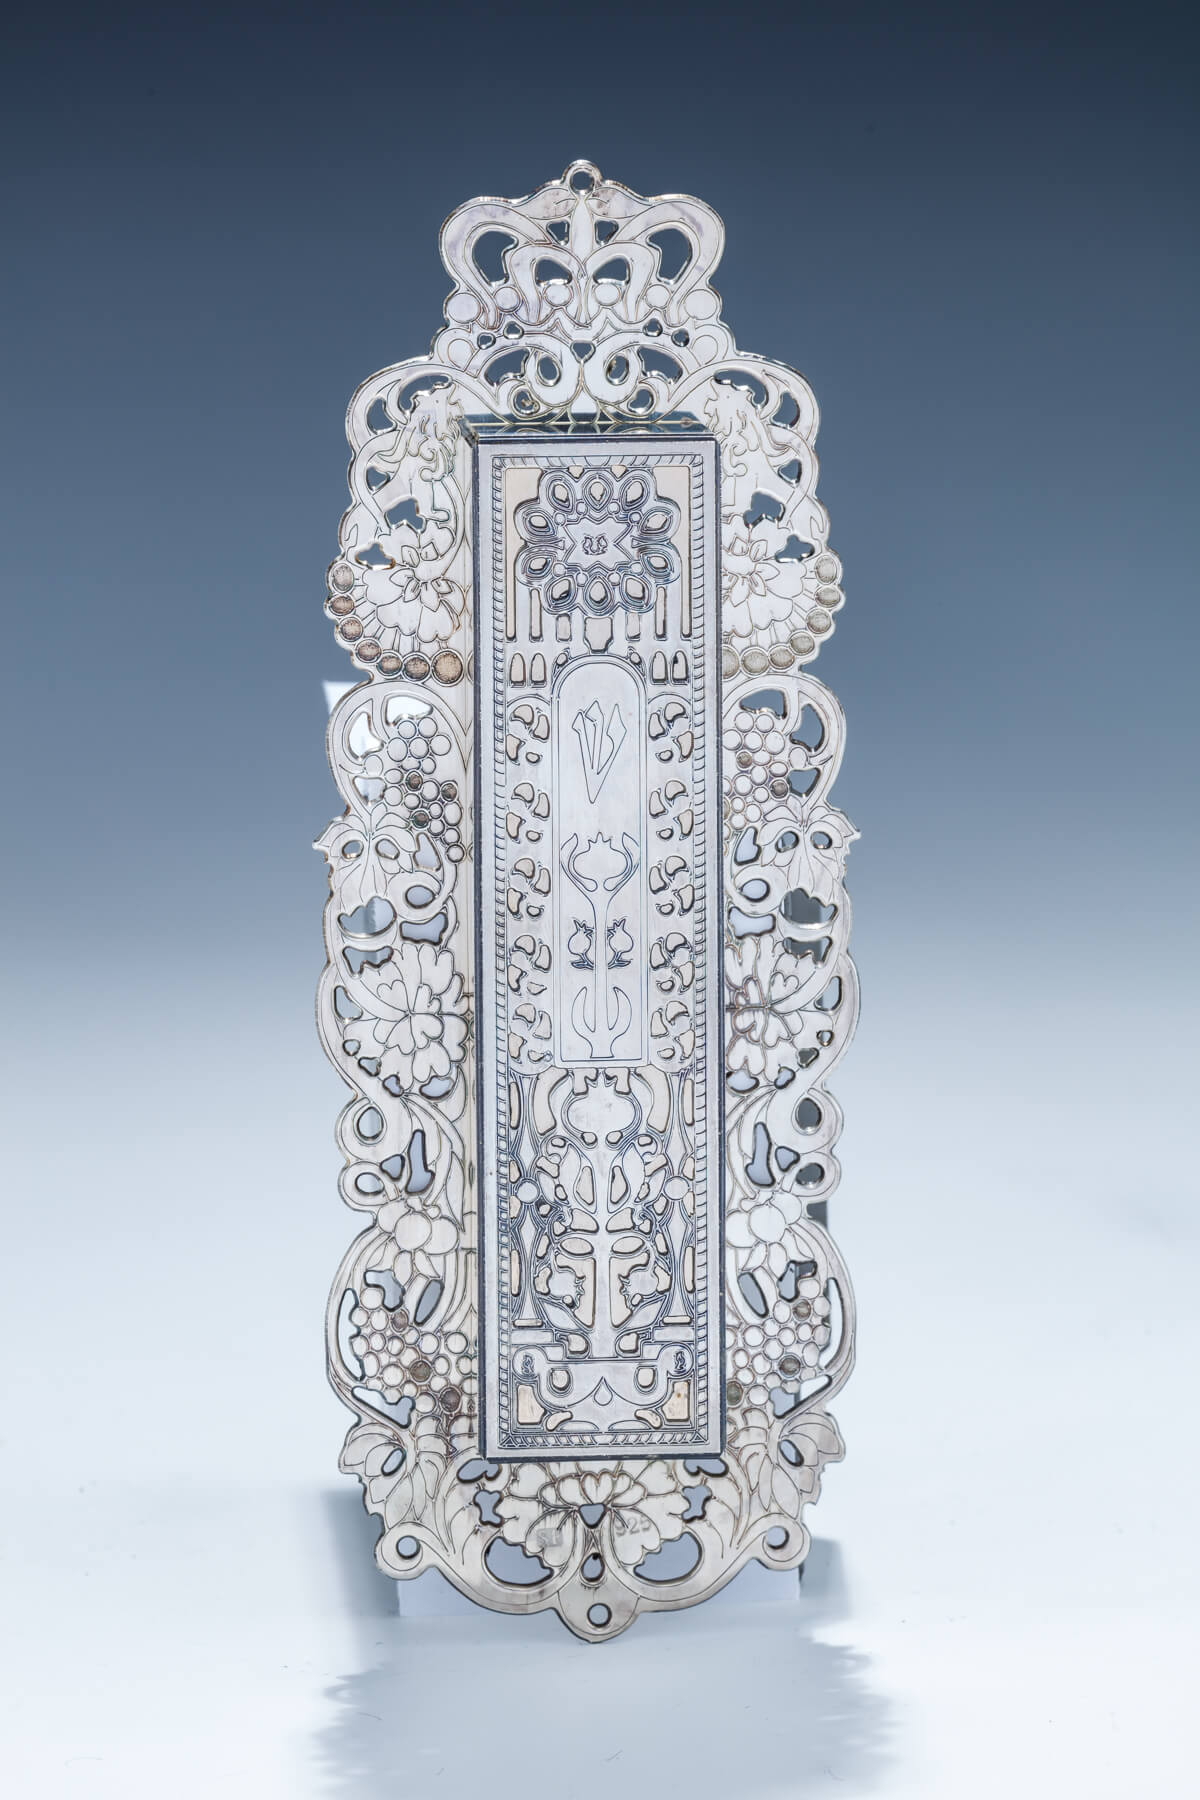 142. A Large Sterling Silver Mezuzah by Shuki Freiman